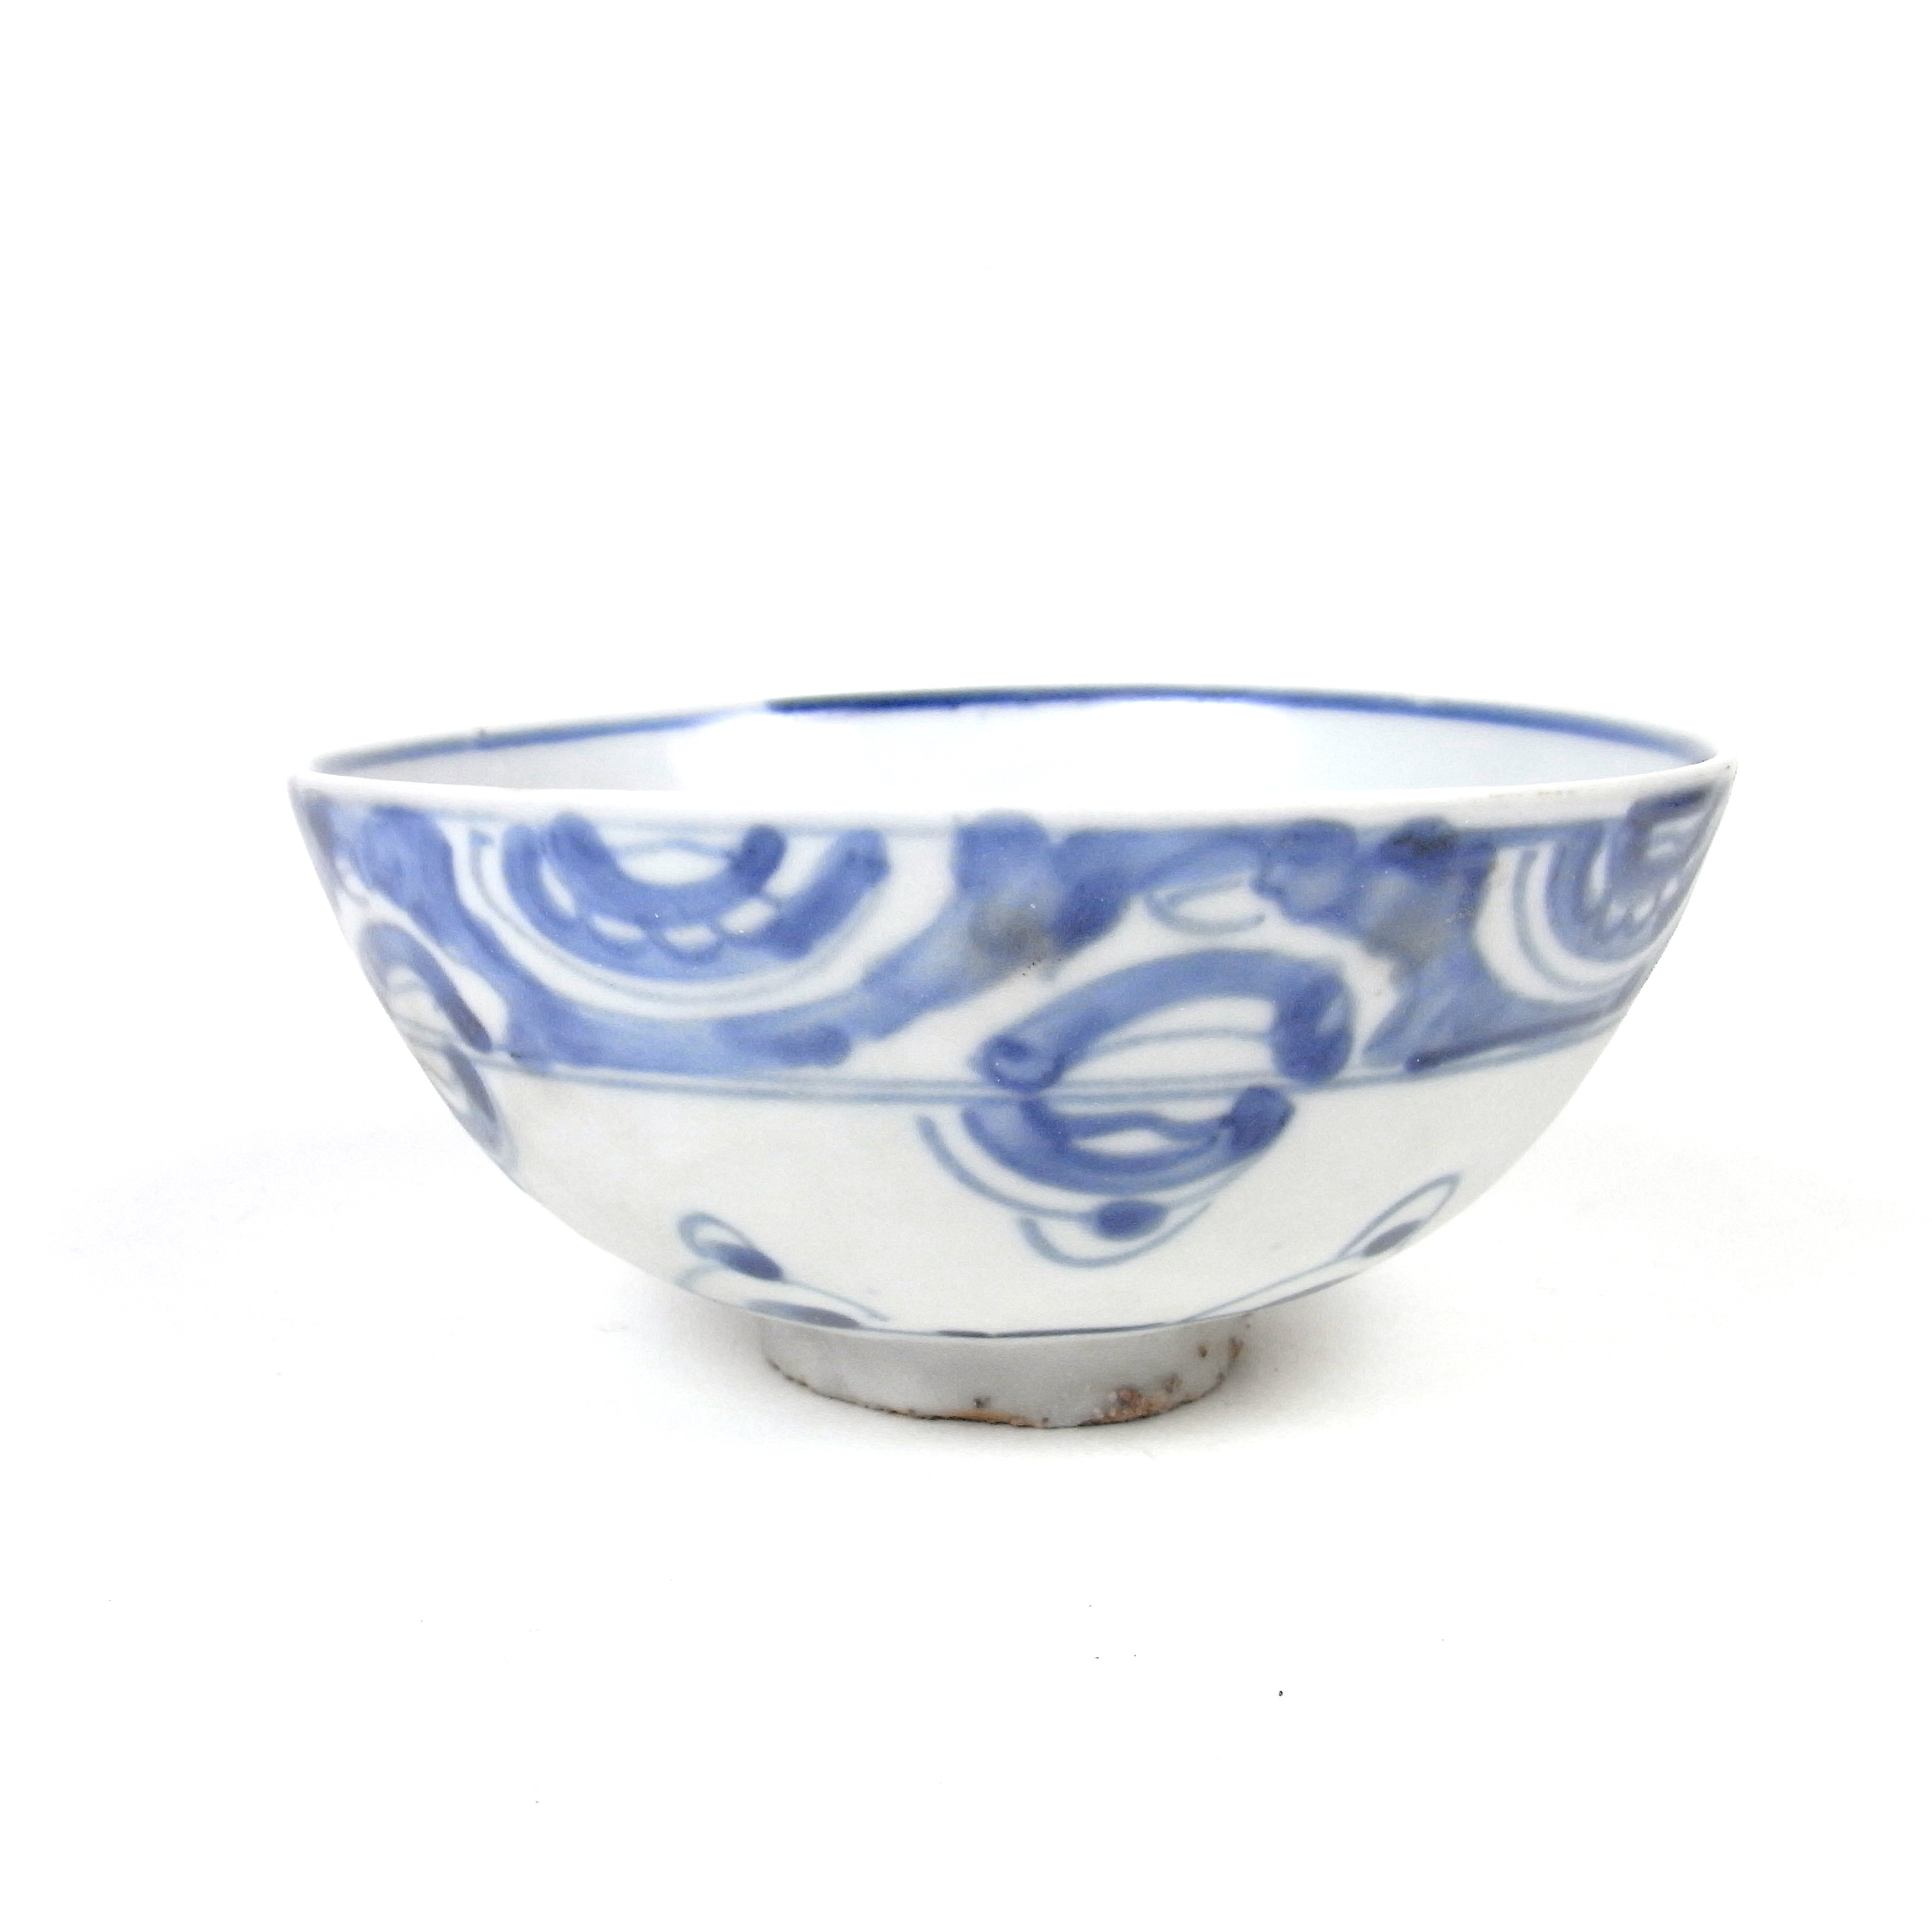 A Chinese blue & white porcelain bowl, probably late Ming period